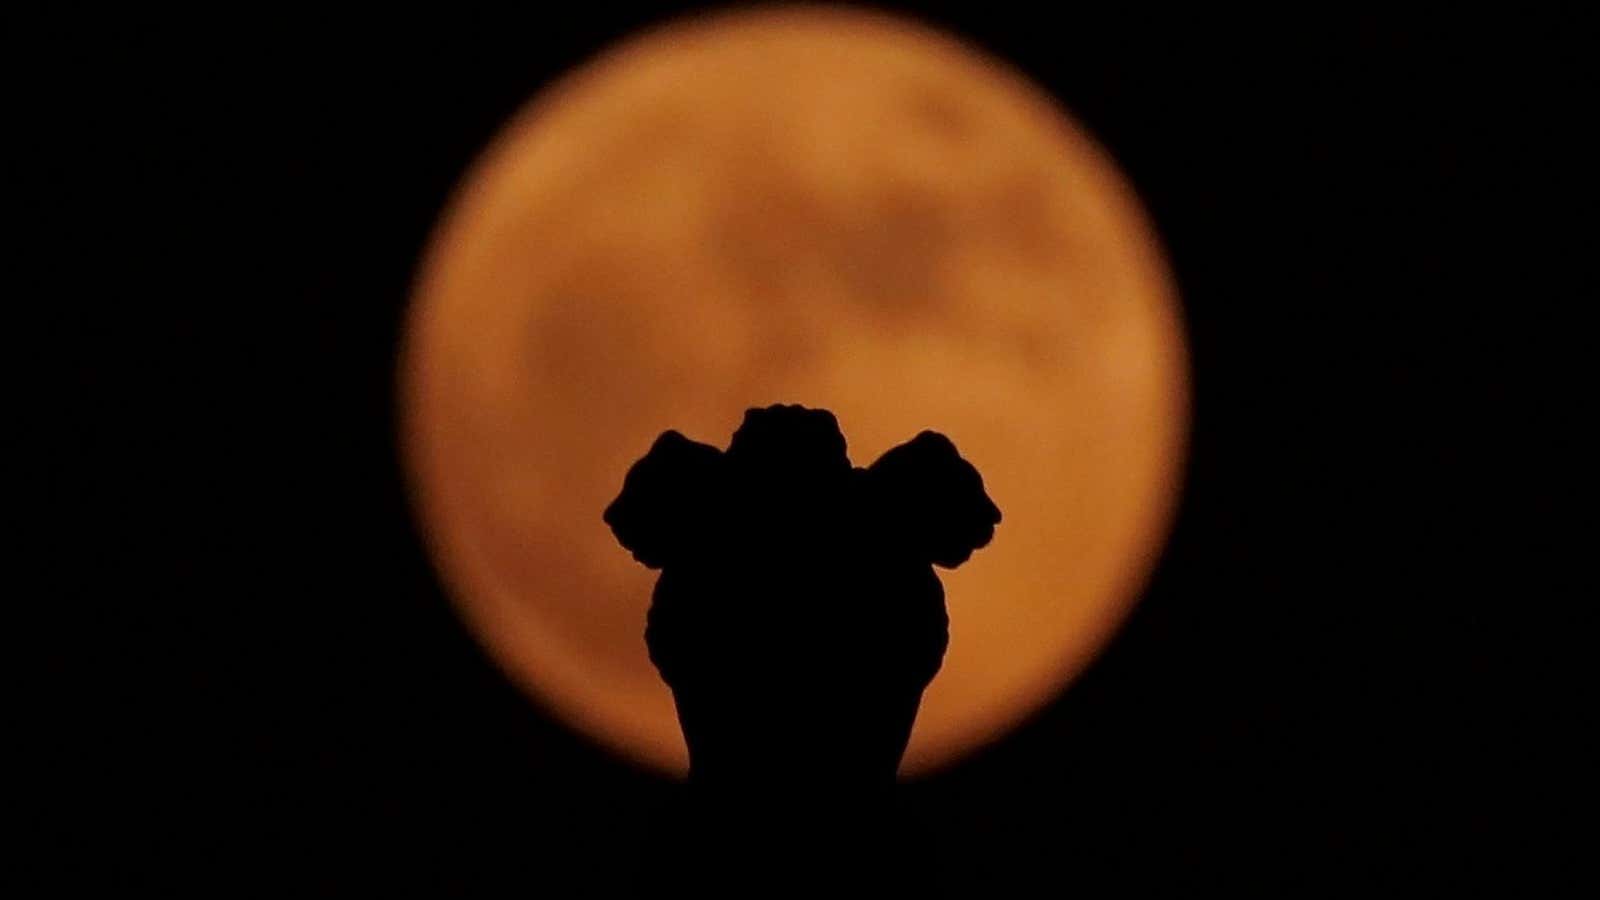 India’s national emblem is seen in front of the supermoon in New Delhi, India November 14, 2016. REUTERS/Adnan Abidi – RTX2TLON